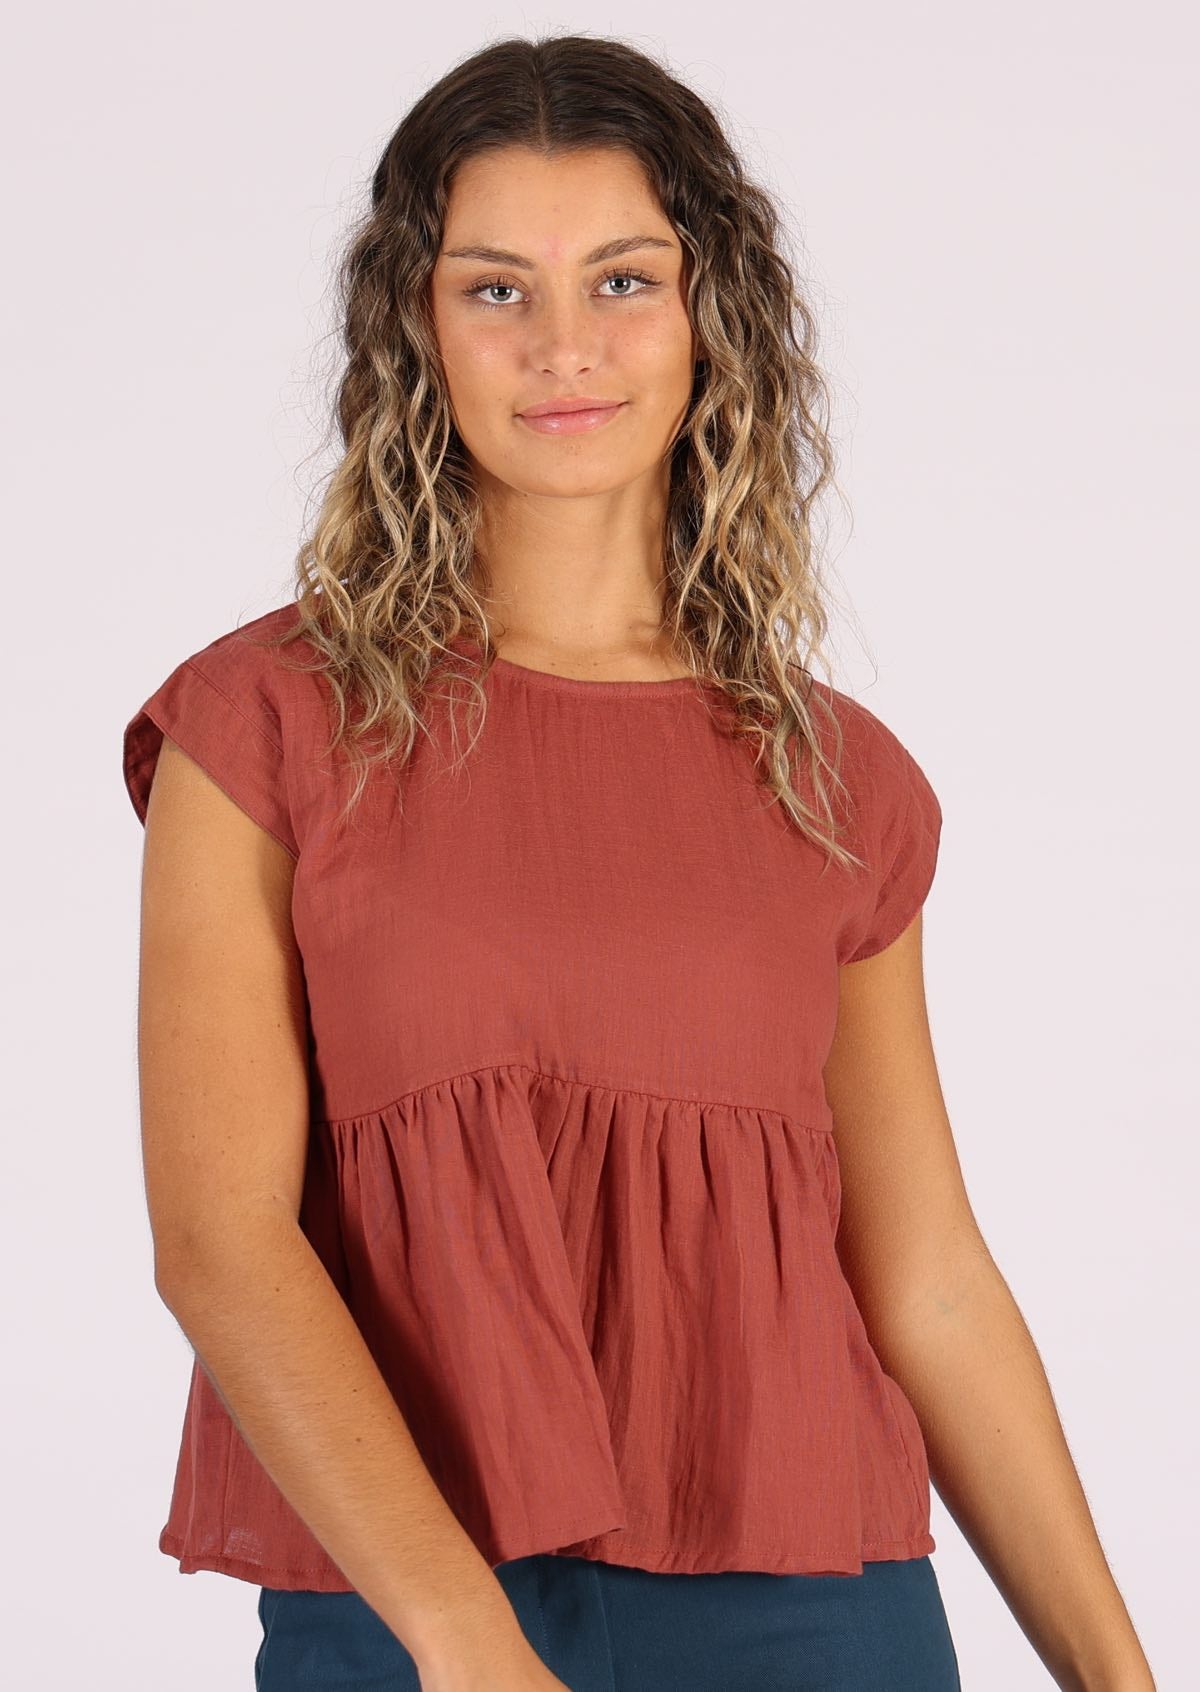 Cotton gauze terracotta coloured top with cap sleeves and ruffle